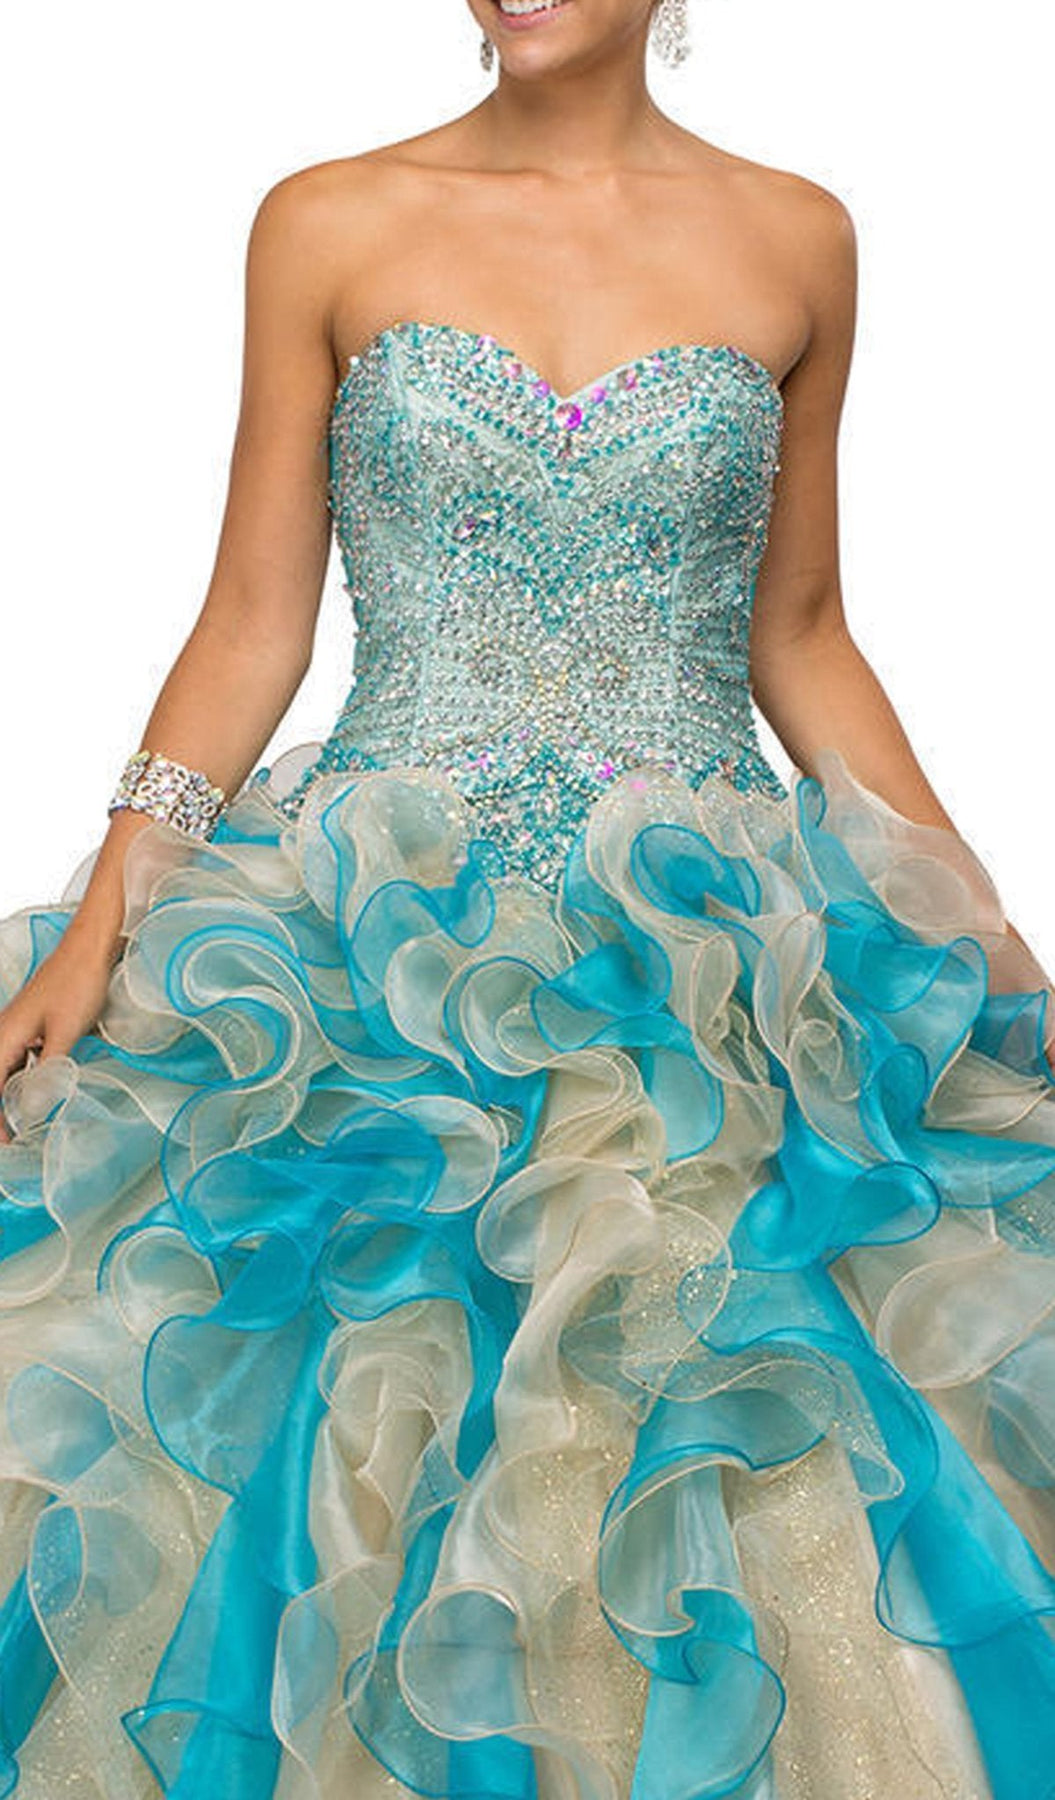 Dancing Queen - 8947 Shimmering Strapless Ruffled Quinceanera Ballgown Special Occasion Dress